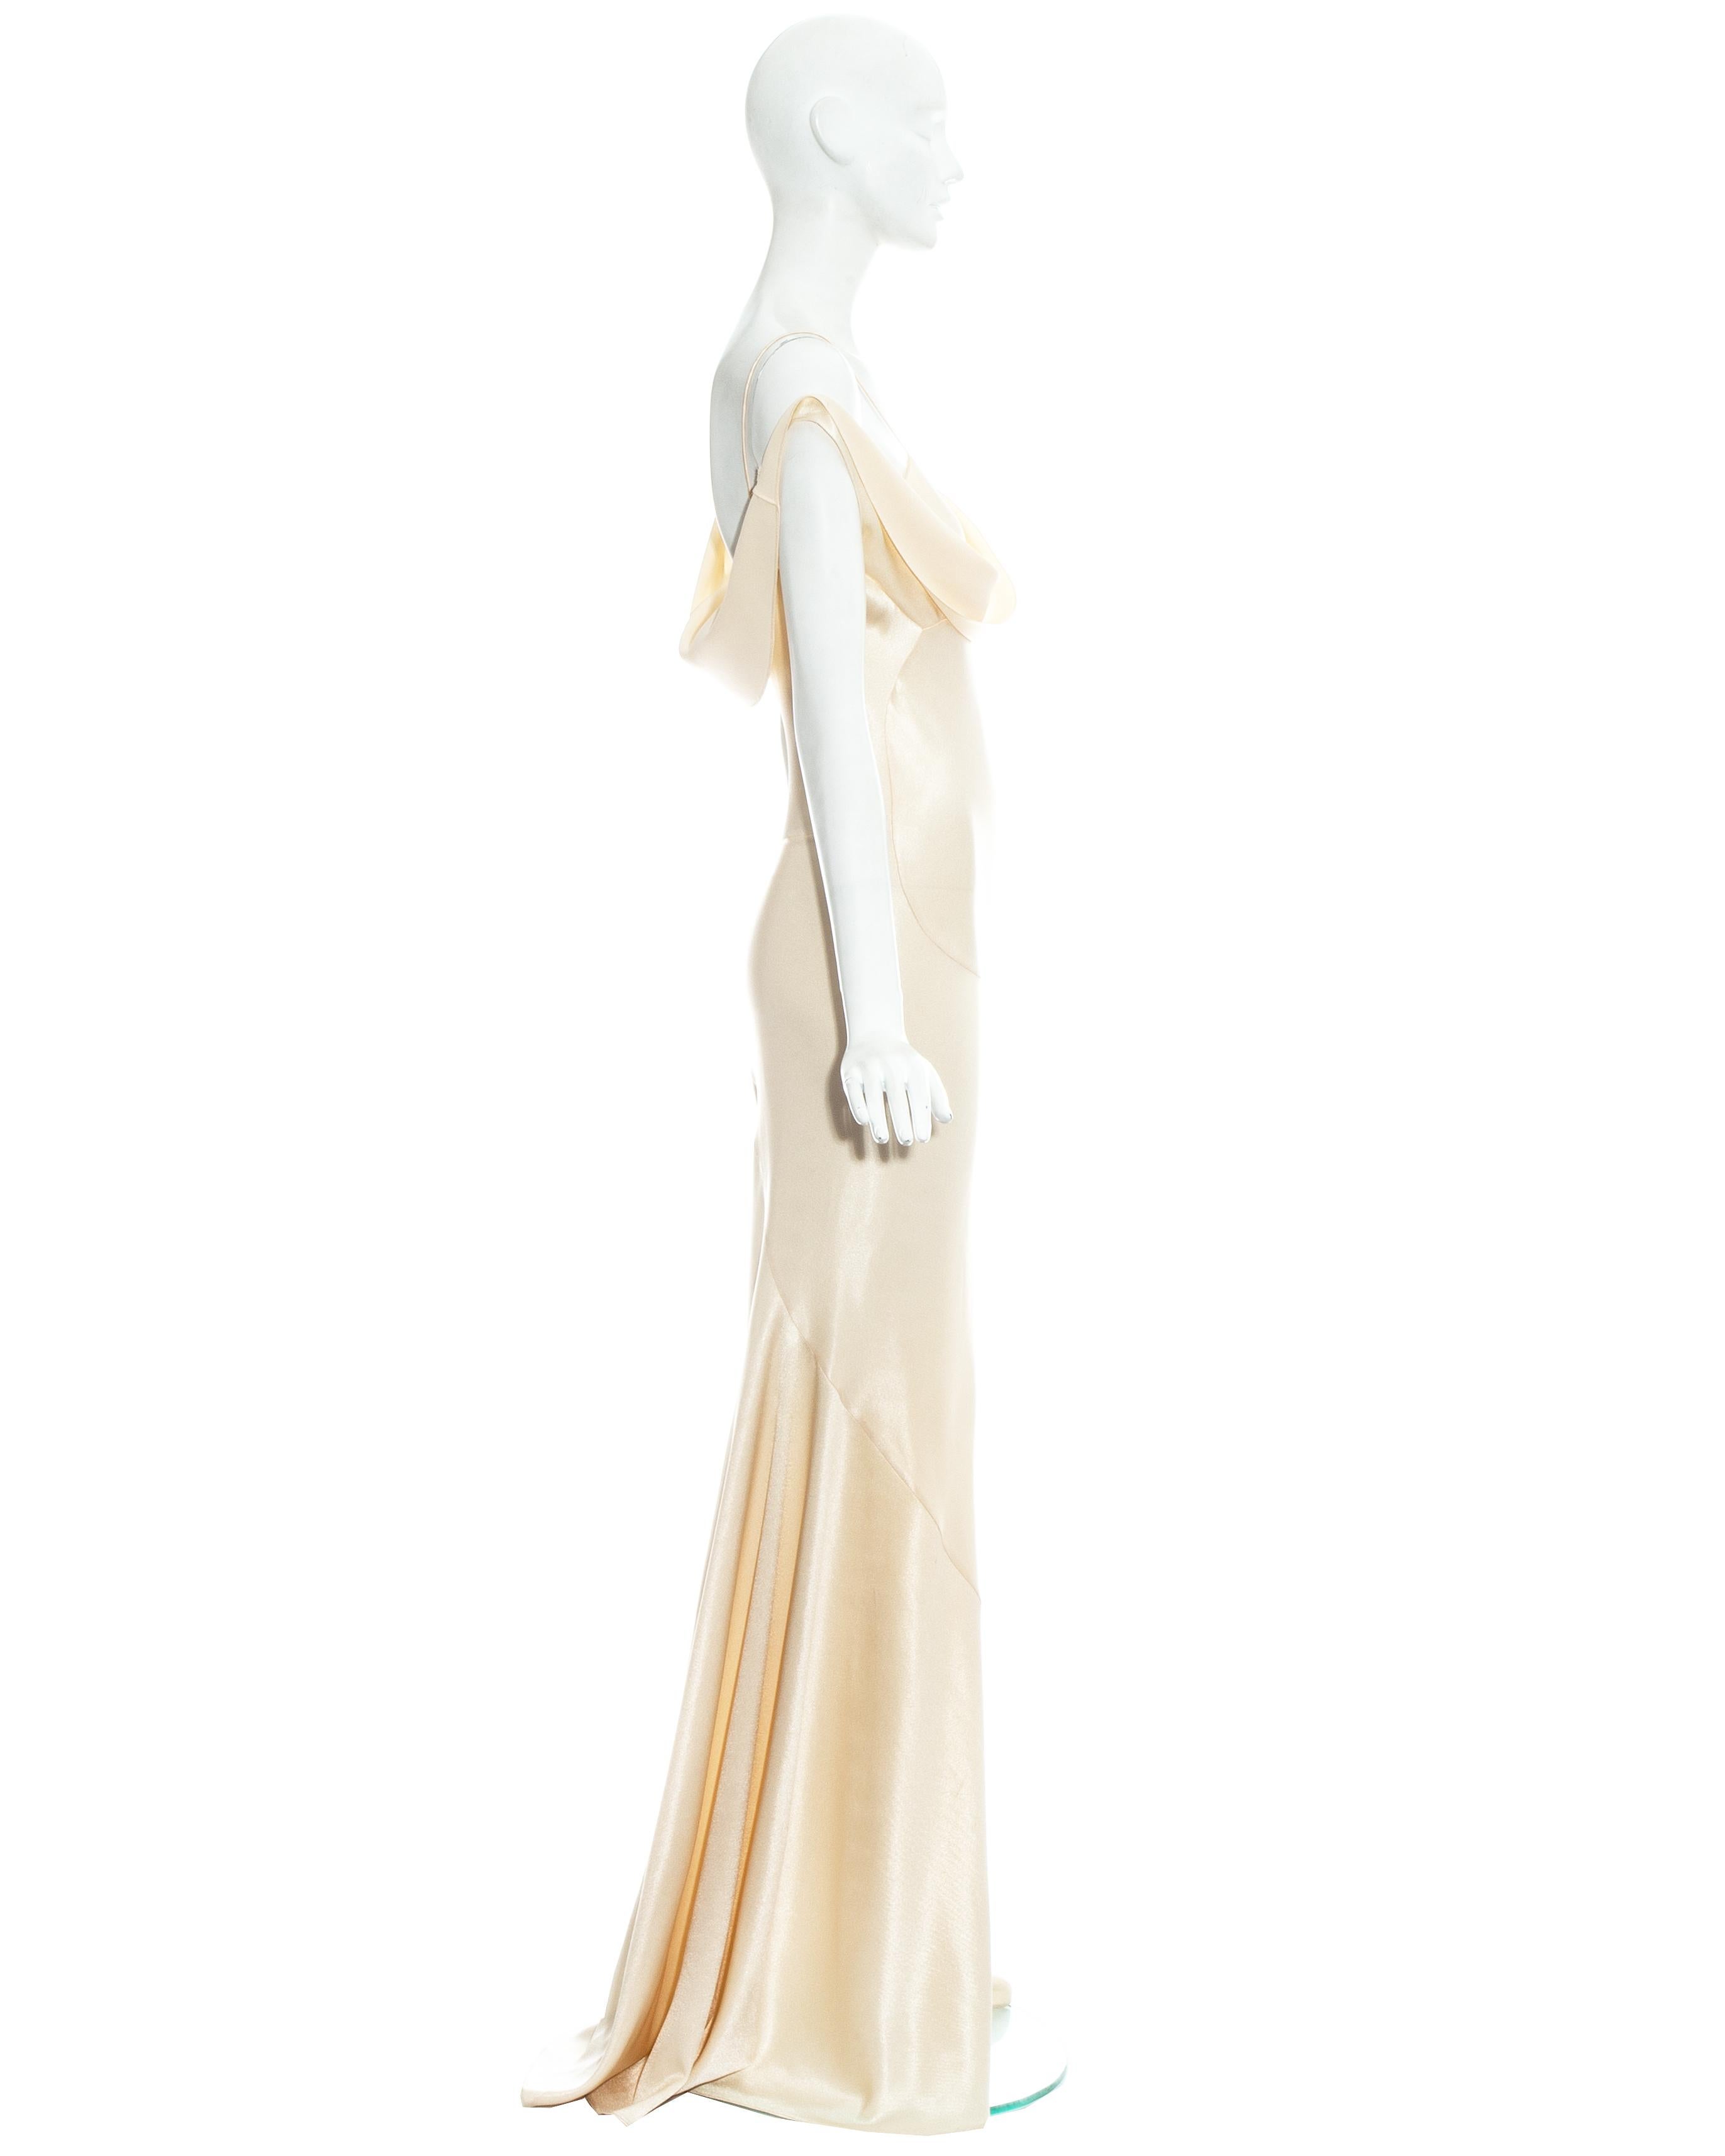 John Galliano champagne bias cut wedding dress, ss 1995 In Excellent Condition For Sale In London, London